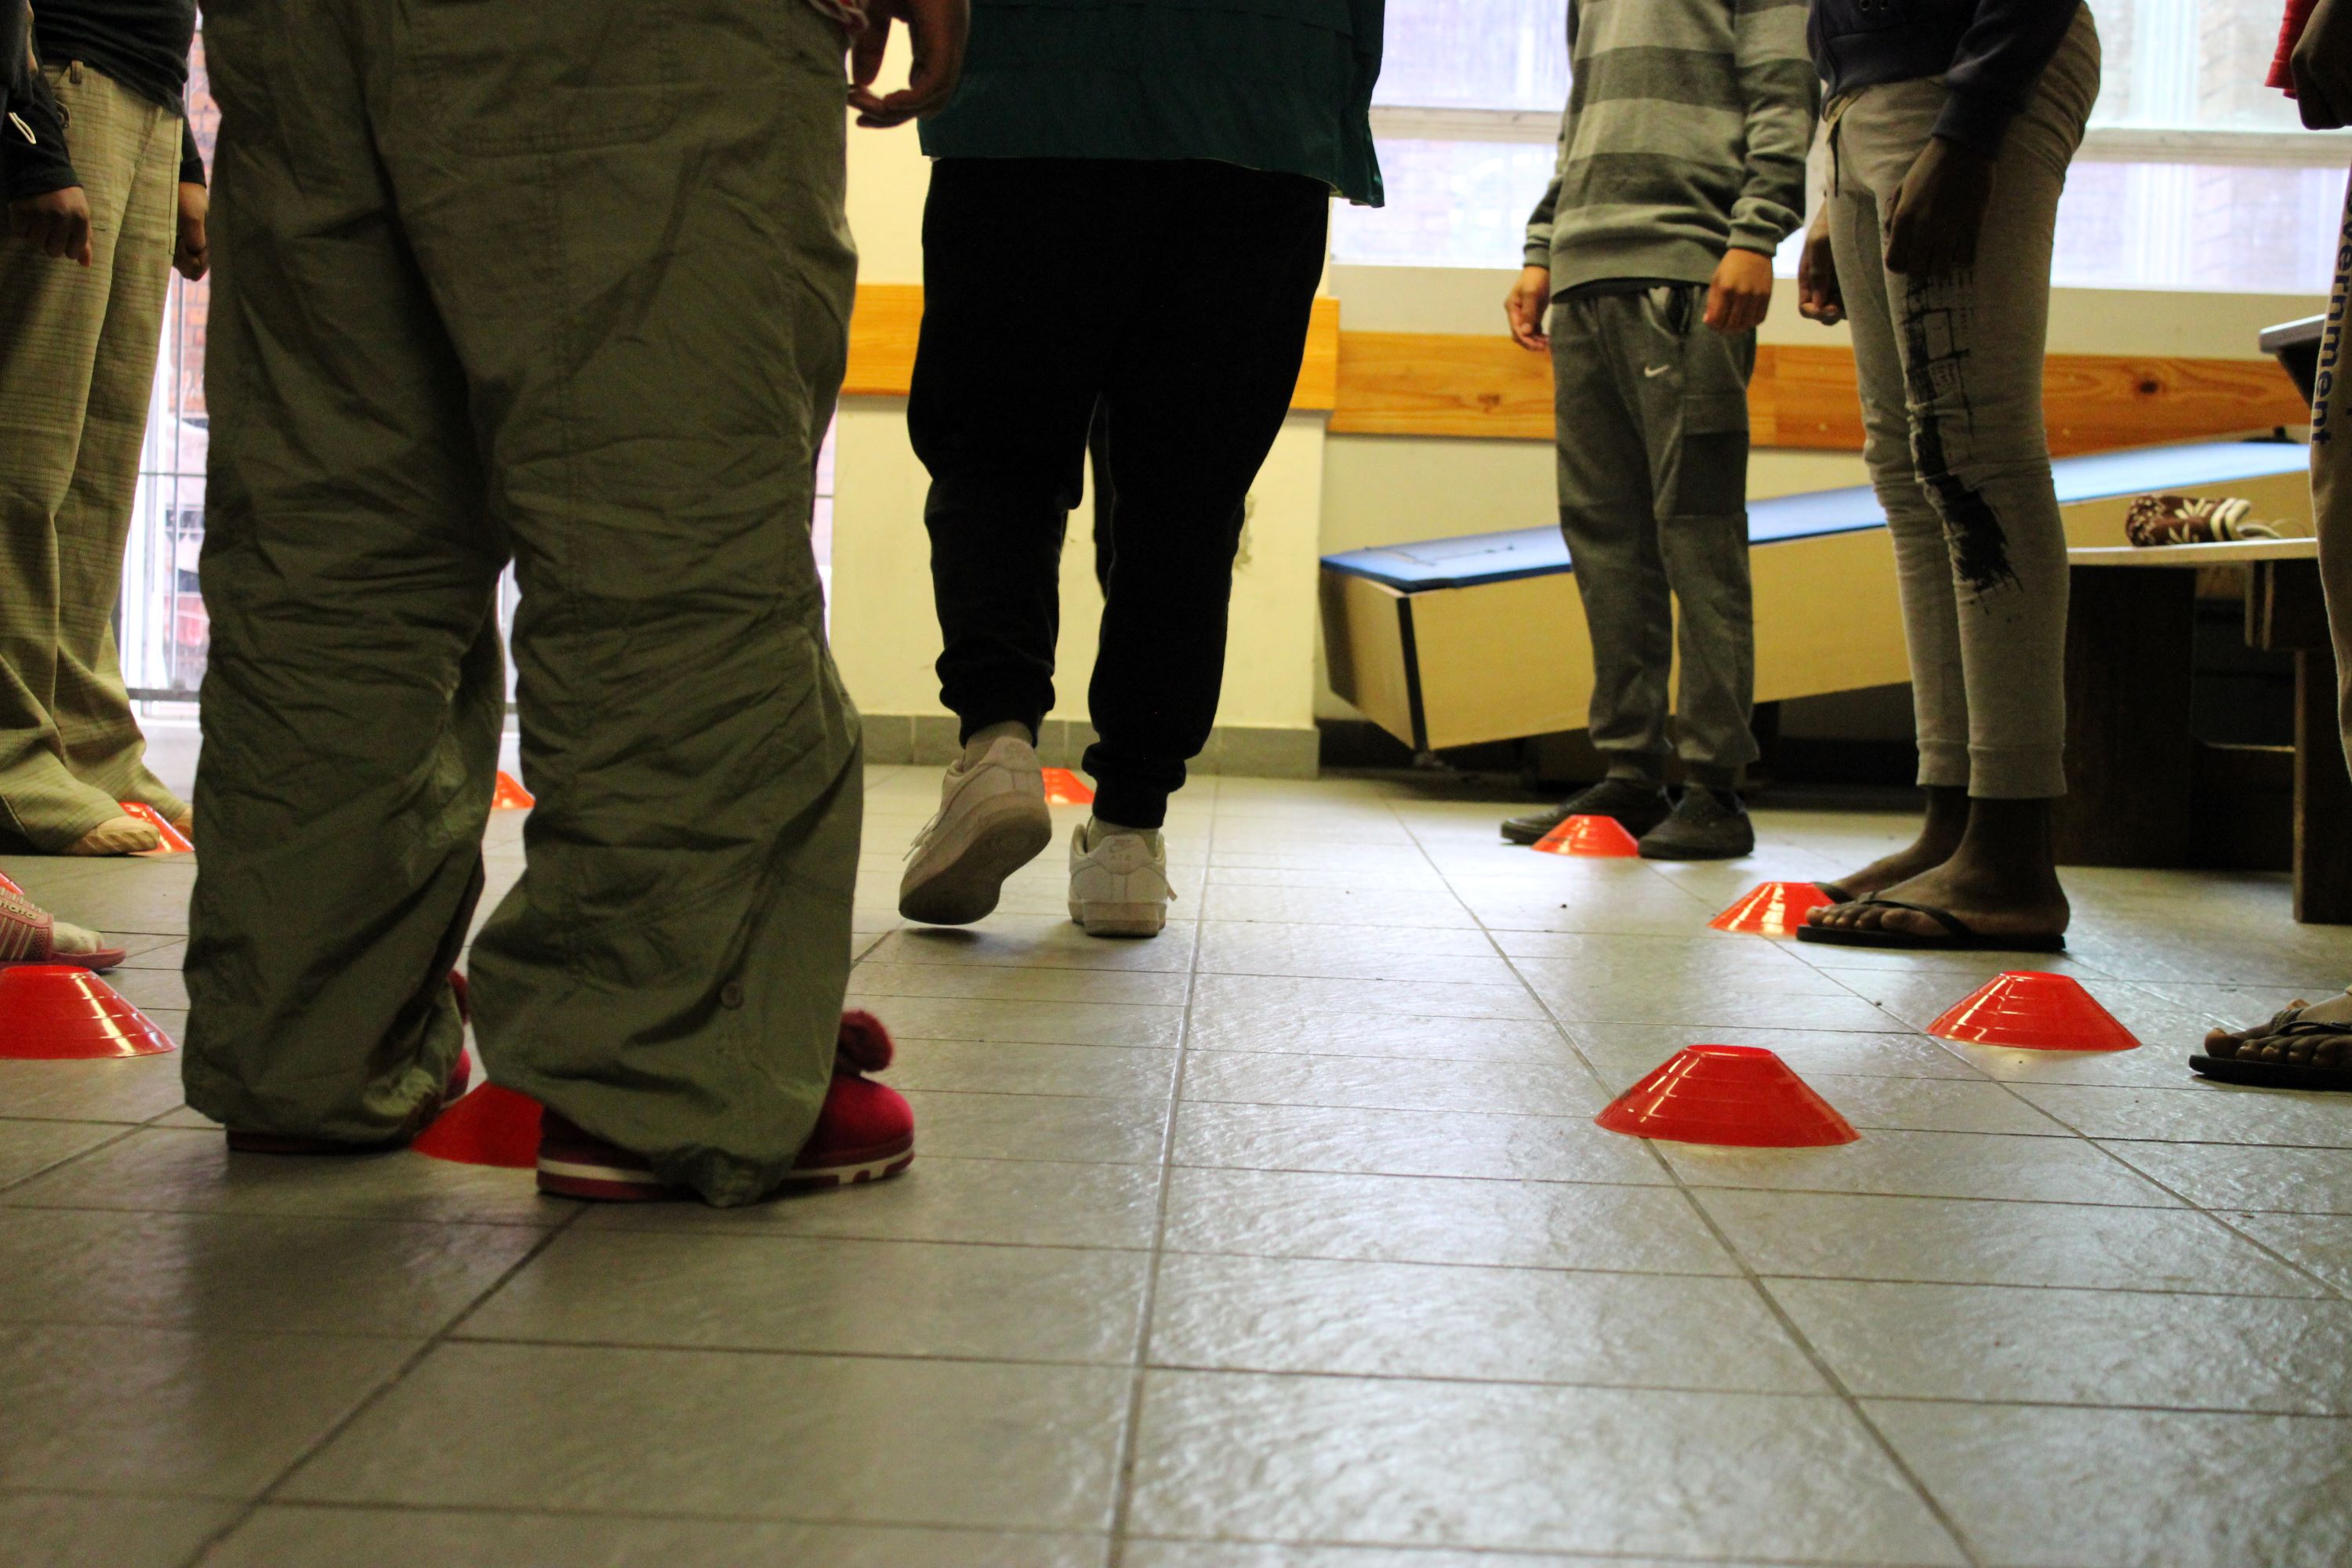 Children in a circle, shown from the waist down, participate in an activity involving orange cones